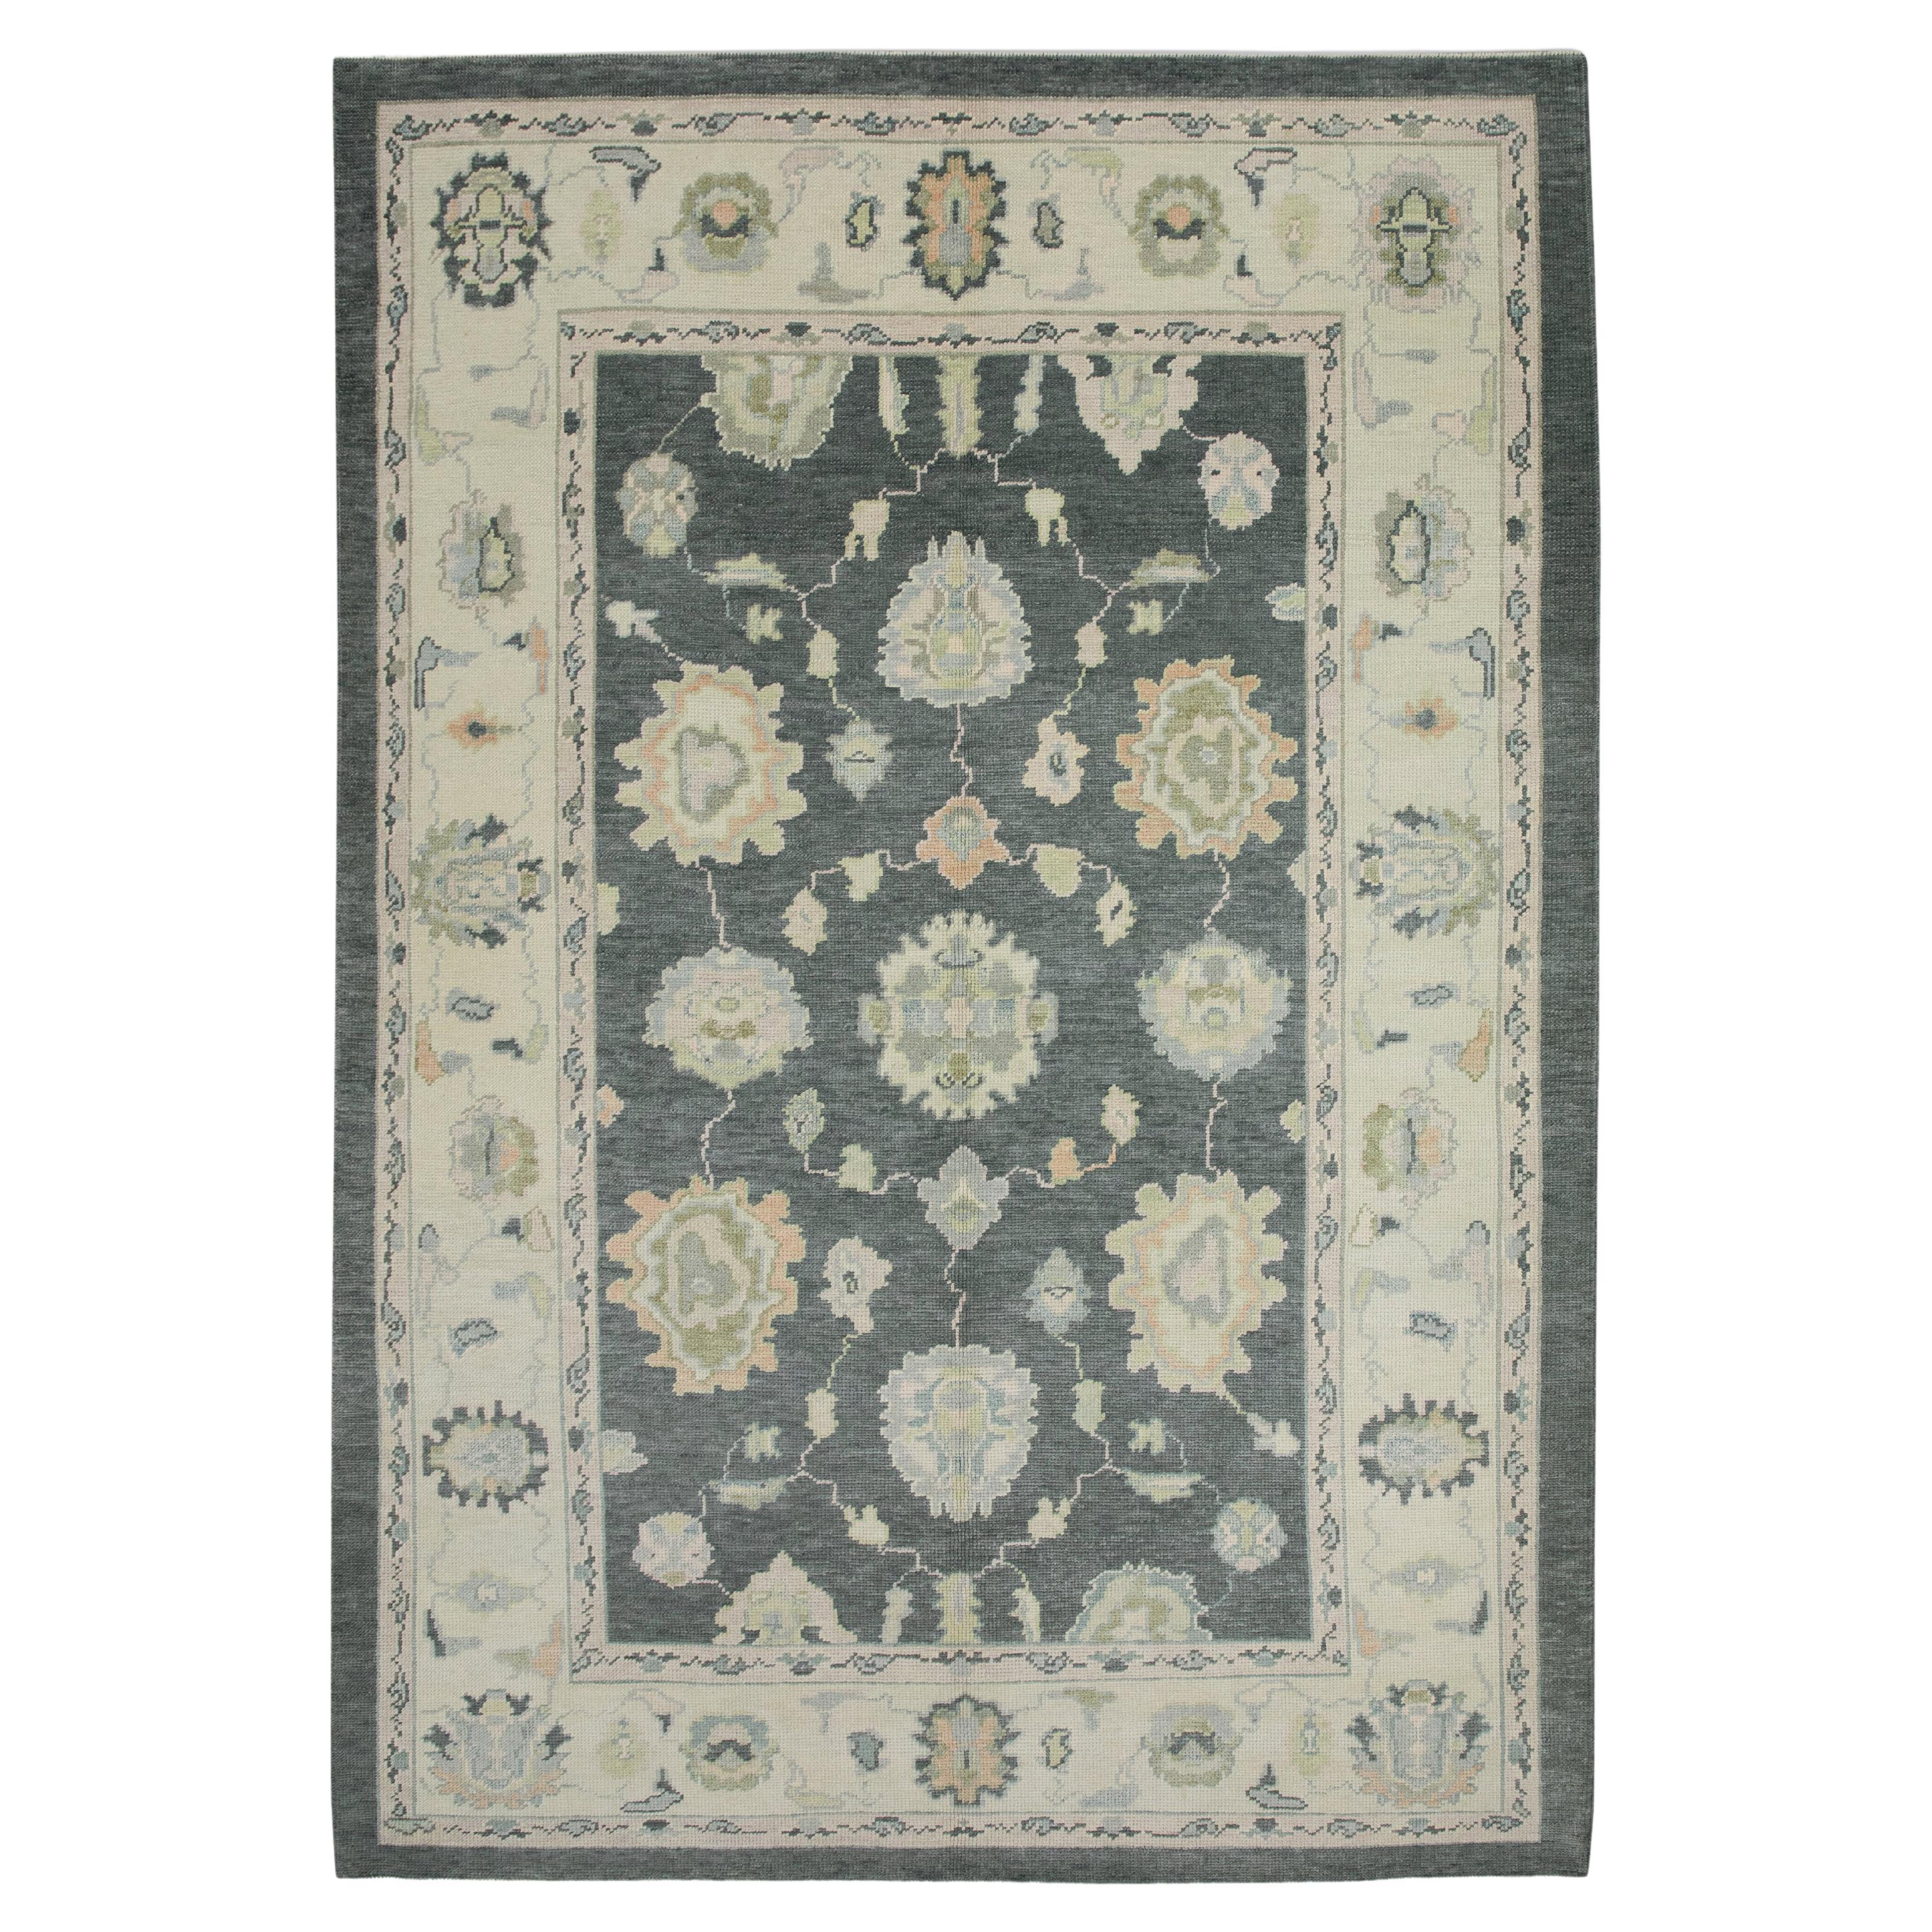 Charcoal Floral Design Handwoven Wool Turkish Oushak Rug 6'3" x 9' For Sale